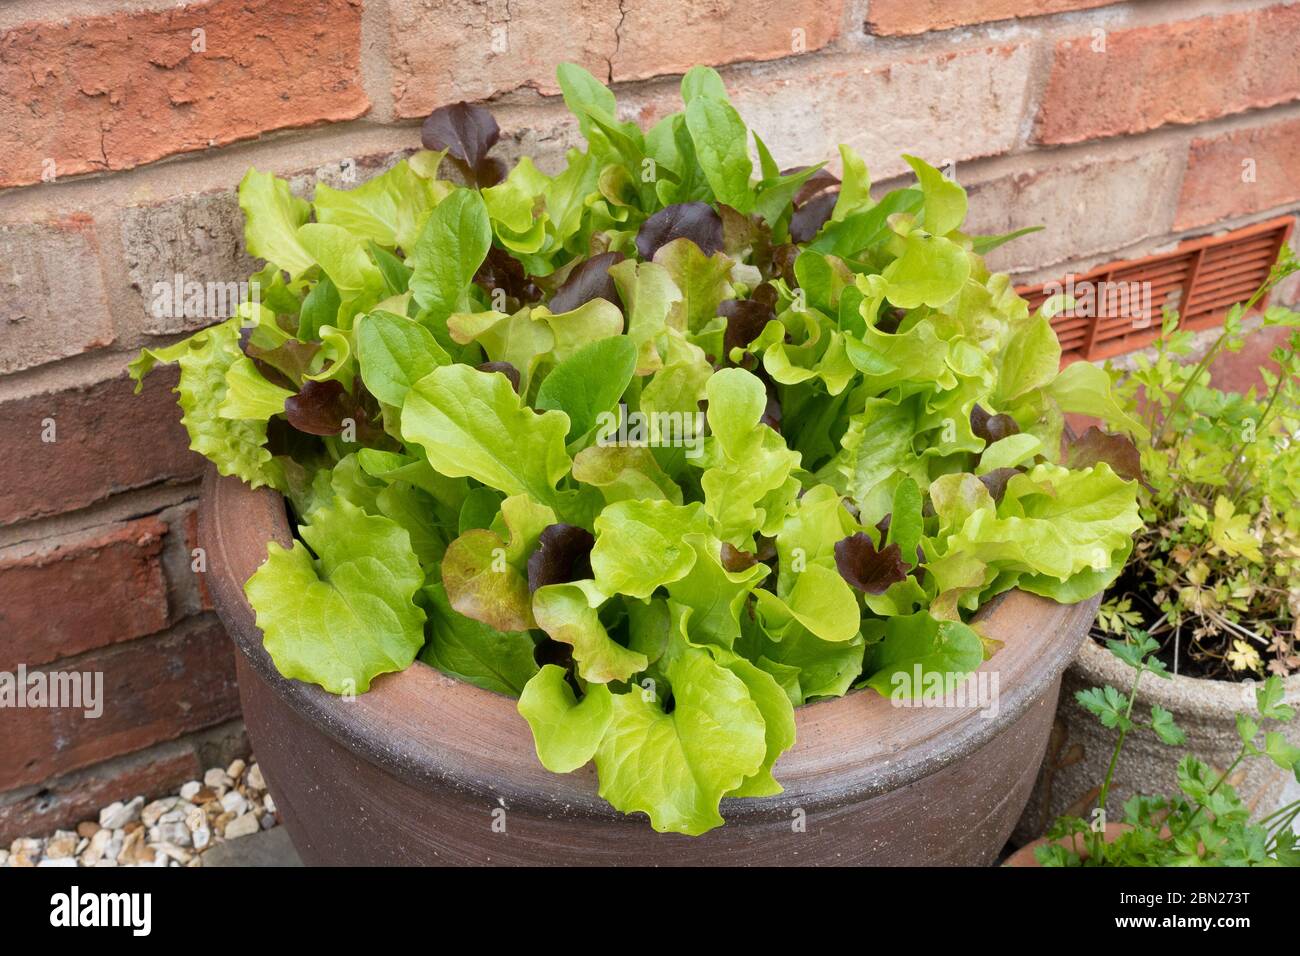 Mixed salad leaves growing in outdoor pots as Coronavirus lockdown encourages self sufficiency during Covid-19 pandemic, England, UK, May 2020. Stock Photo